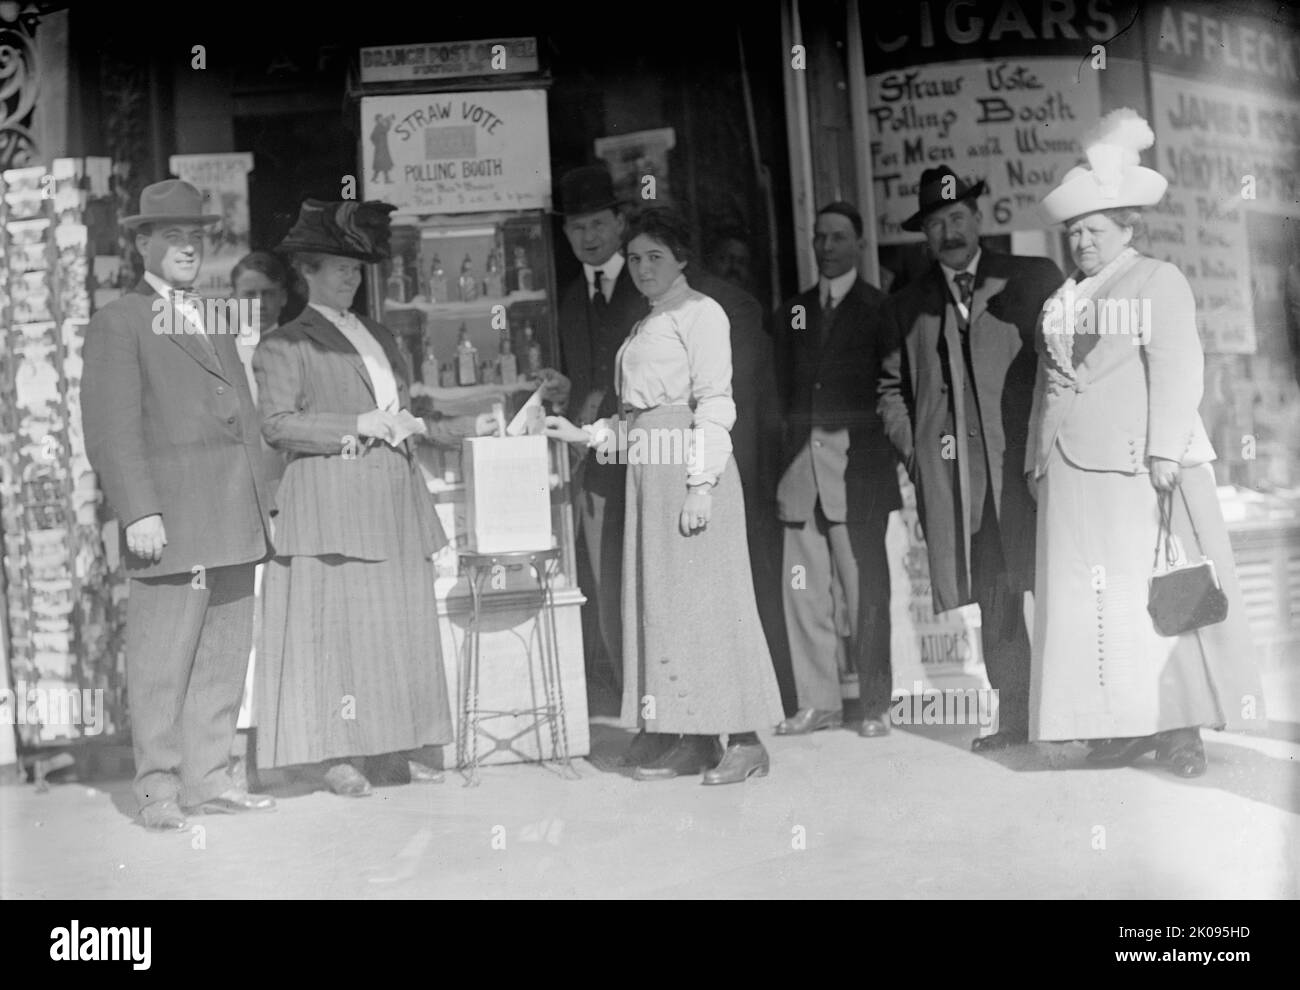 District of Columbia - Suffrage Voting For District, 1912. 'Straw Vote Polling Booth for Men and Women'...[American women won the national vote in 1920 with the passing of the 19th Amendment]. Stock Photo